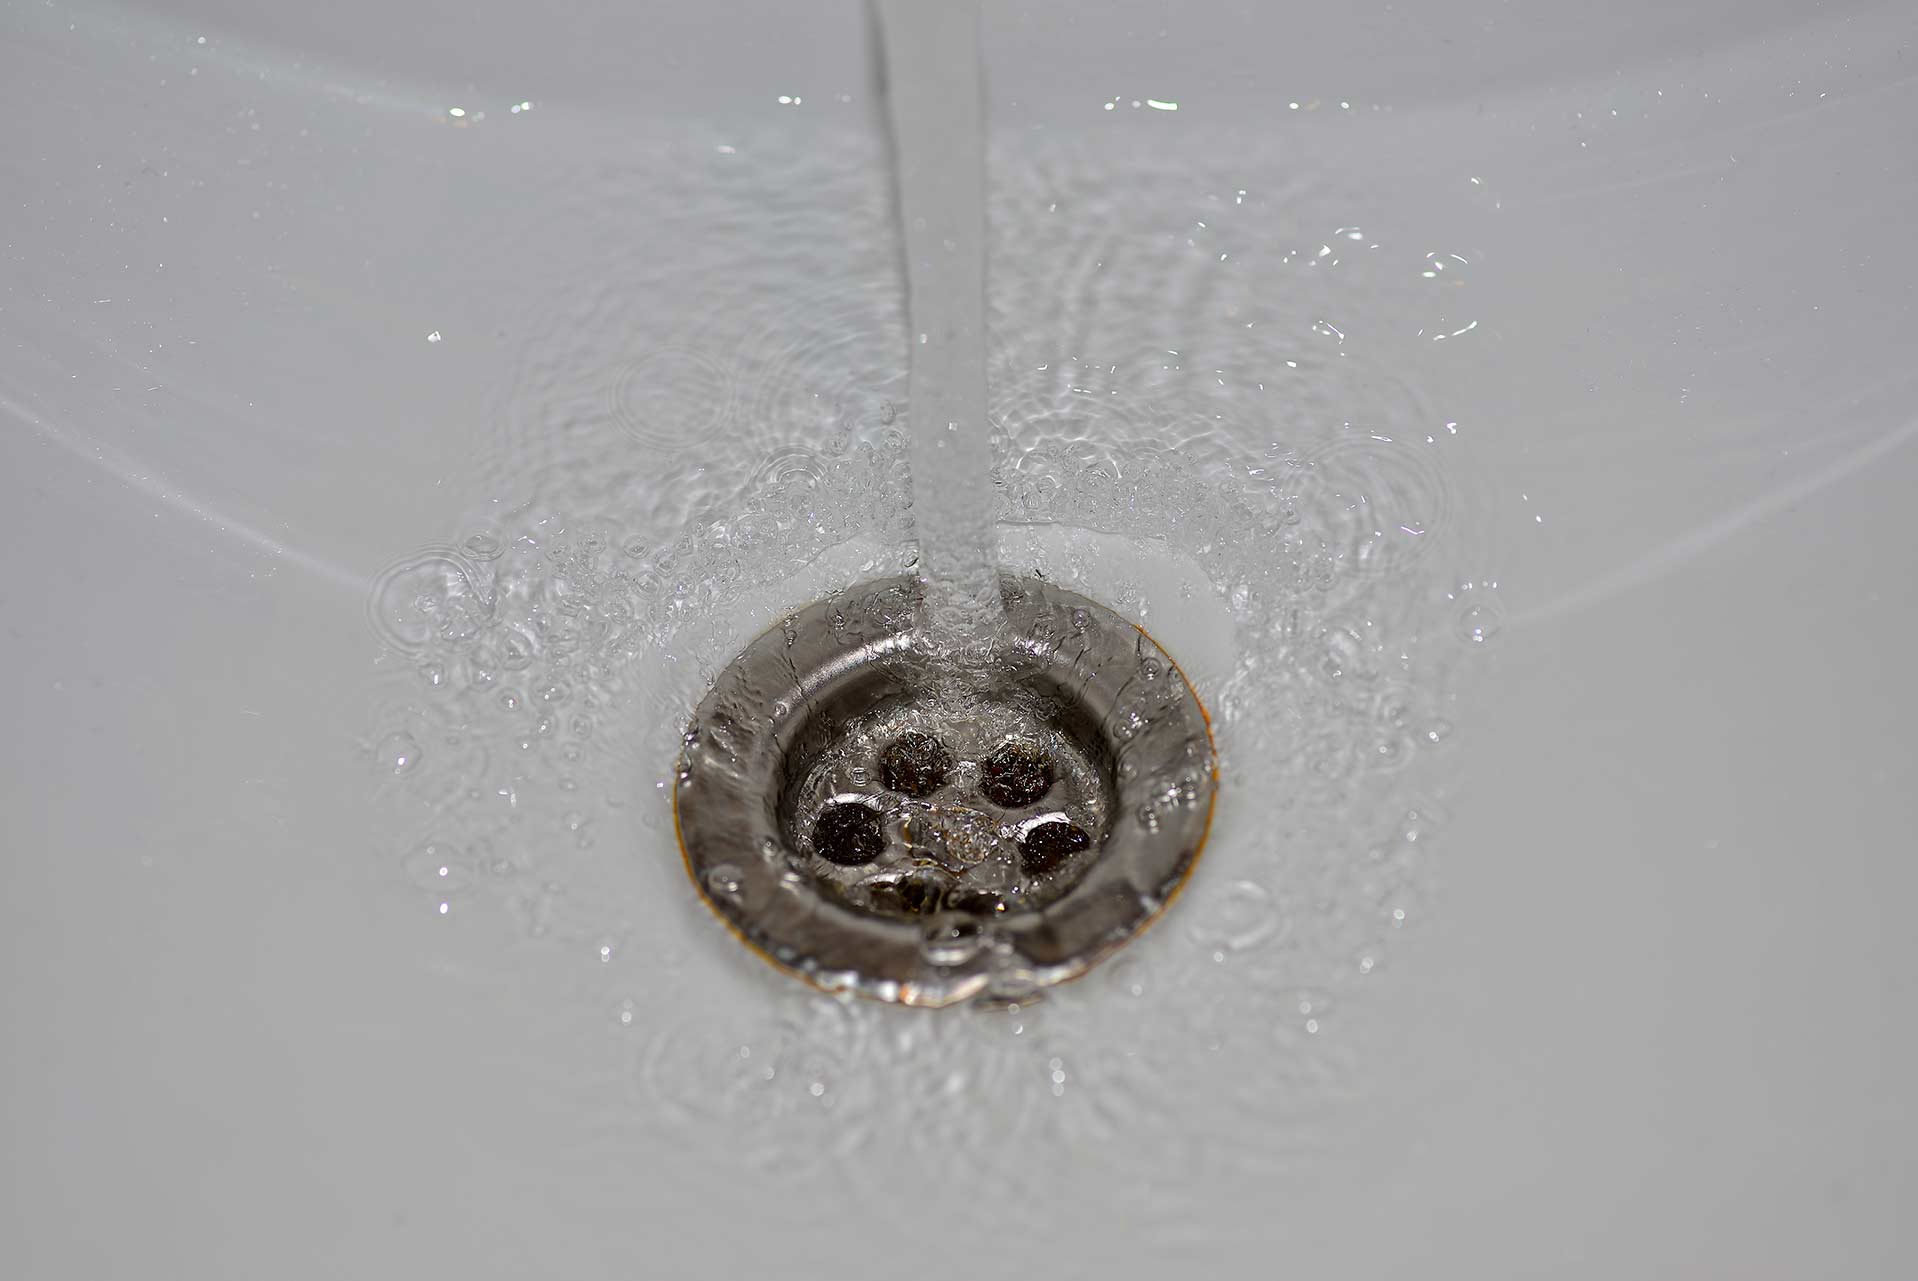 A2B Drains provides services to unblock blocked sinks and drains for properties in Huddersfield.